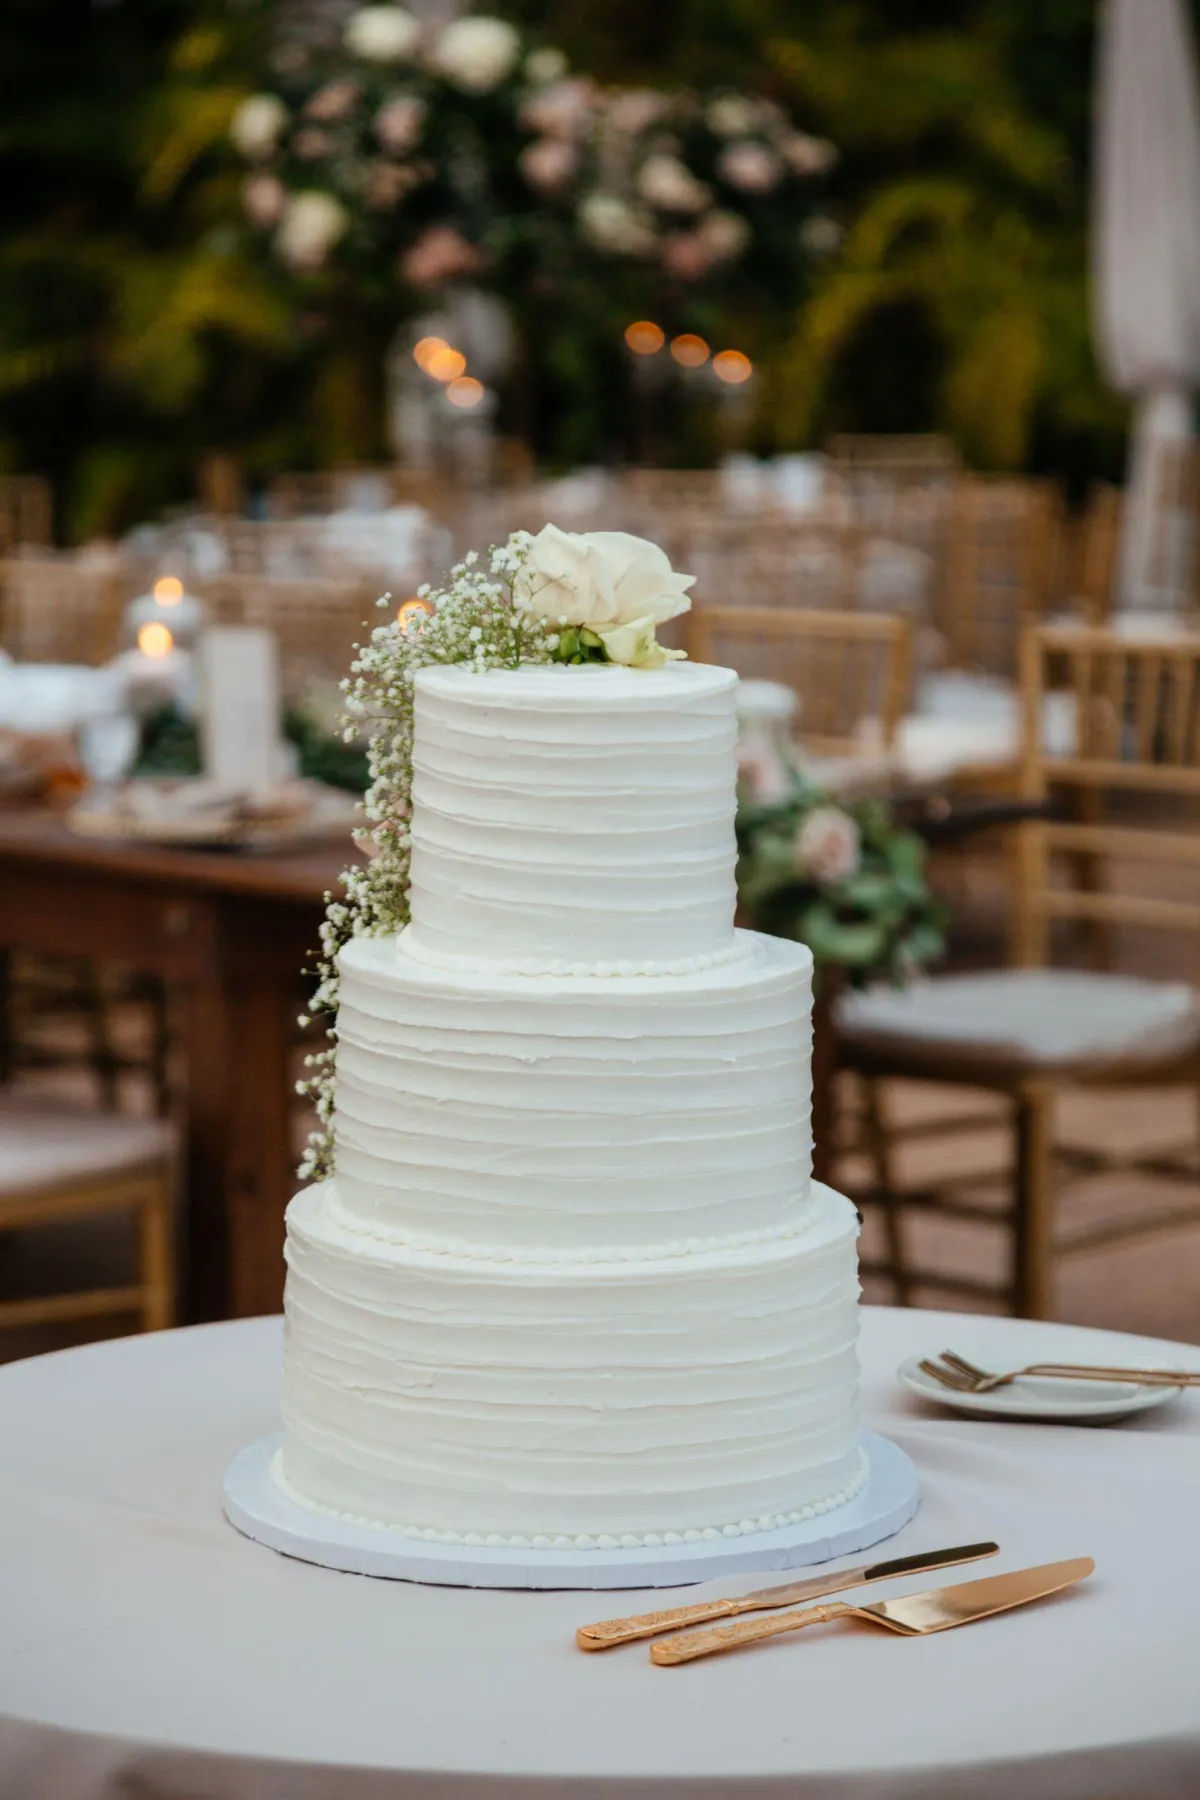 Naked wedding cake adorned with flowers for a touch of charm